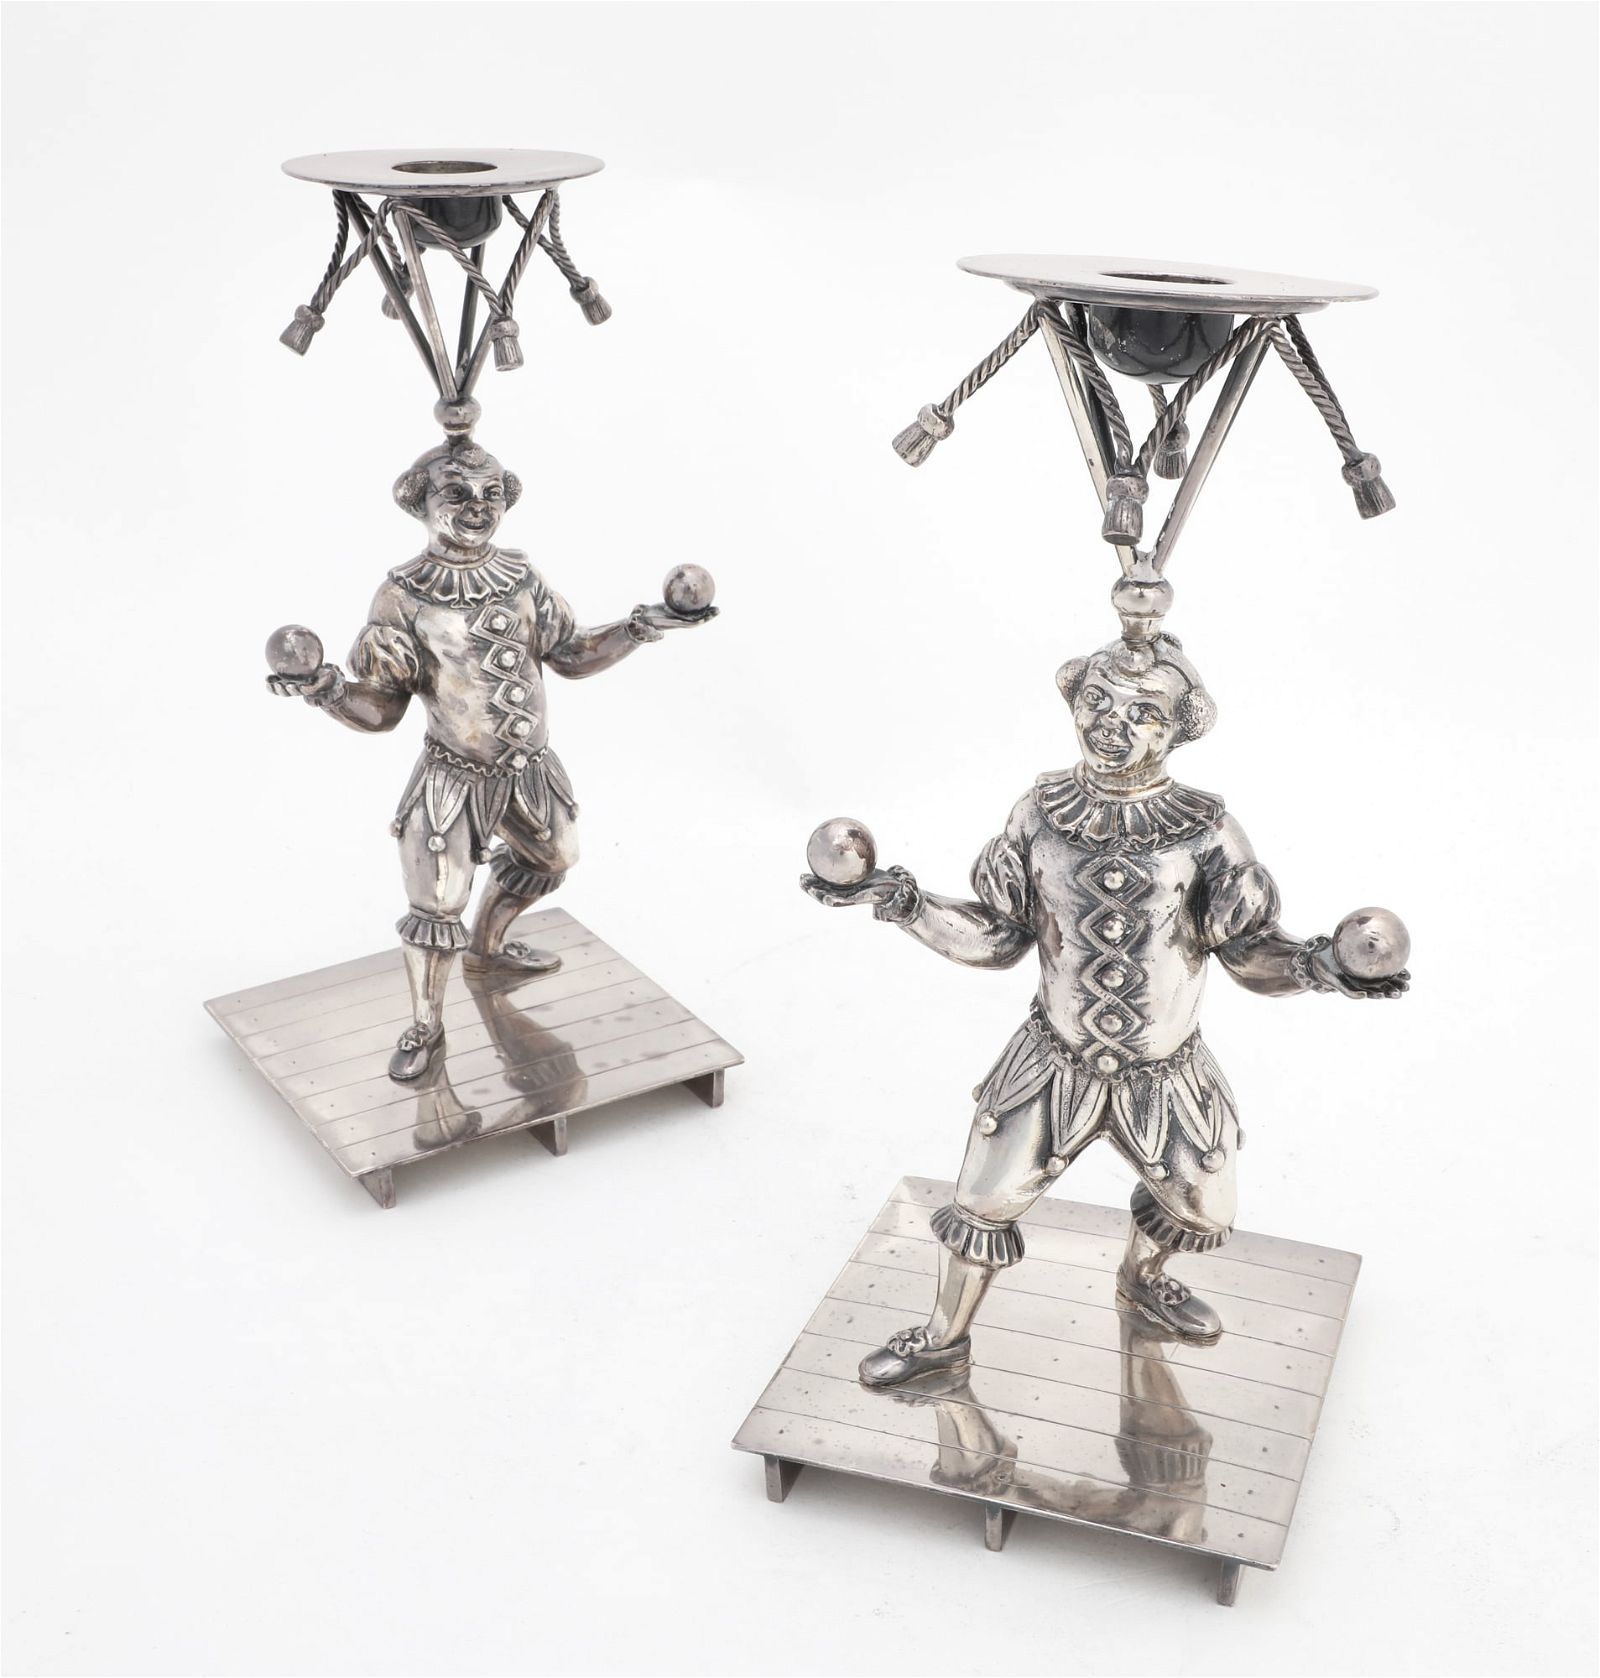 PAIR OF ENGLISH SILVERPLATE FIGURAL